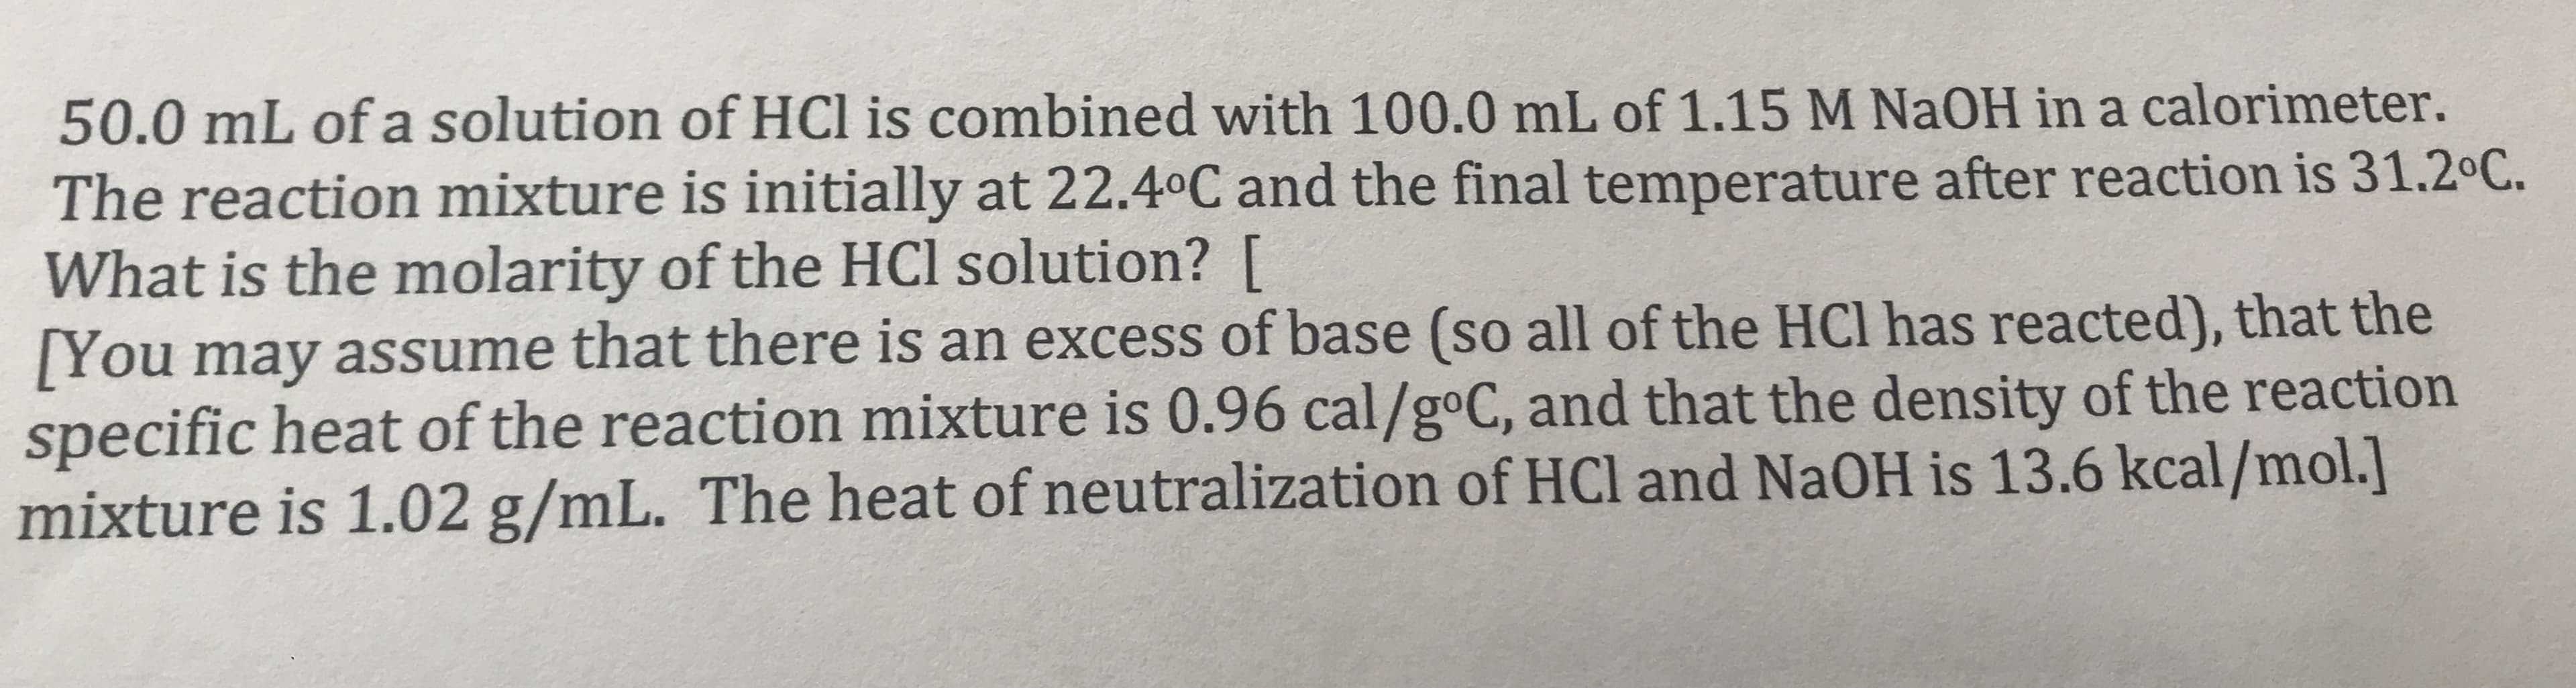 50.0 mL of a solution of HCl is combined with 100.0 mL of 1.15 M NaOH in a calorimeter.
The reaction mixture is initially at 22.40C and the final temperature after reaction is 31.2 C.
What is the molarity of the HCl solution? [
[You may assume that there is an excess of base (so all of the HCl has reacted), that the
specific heat of the reaction mixture is 0.96 cal/goC, and that the density of the reaction
mixture is 1.02 g/mL. The heat of neutralization of HCl and NAOH is 13.6 kcal/mol.]
